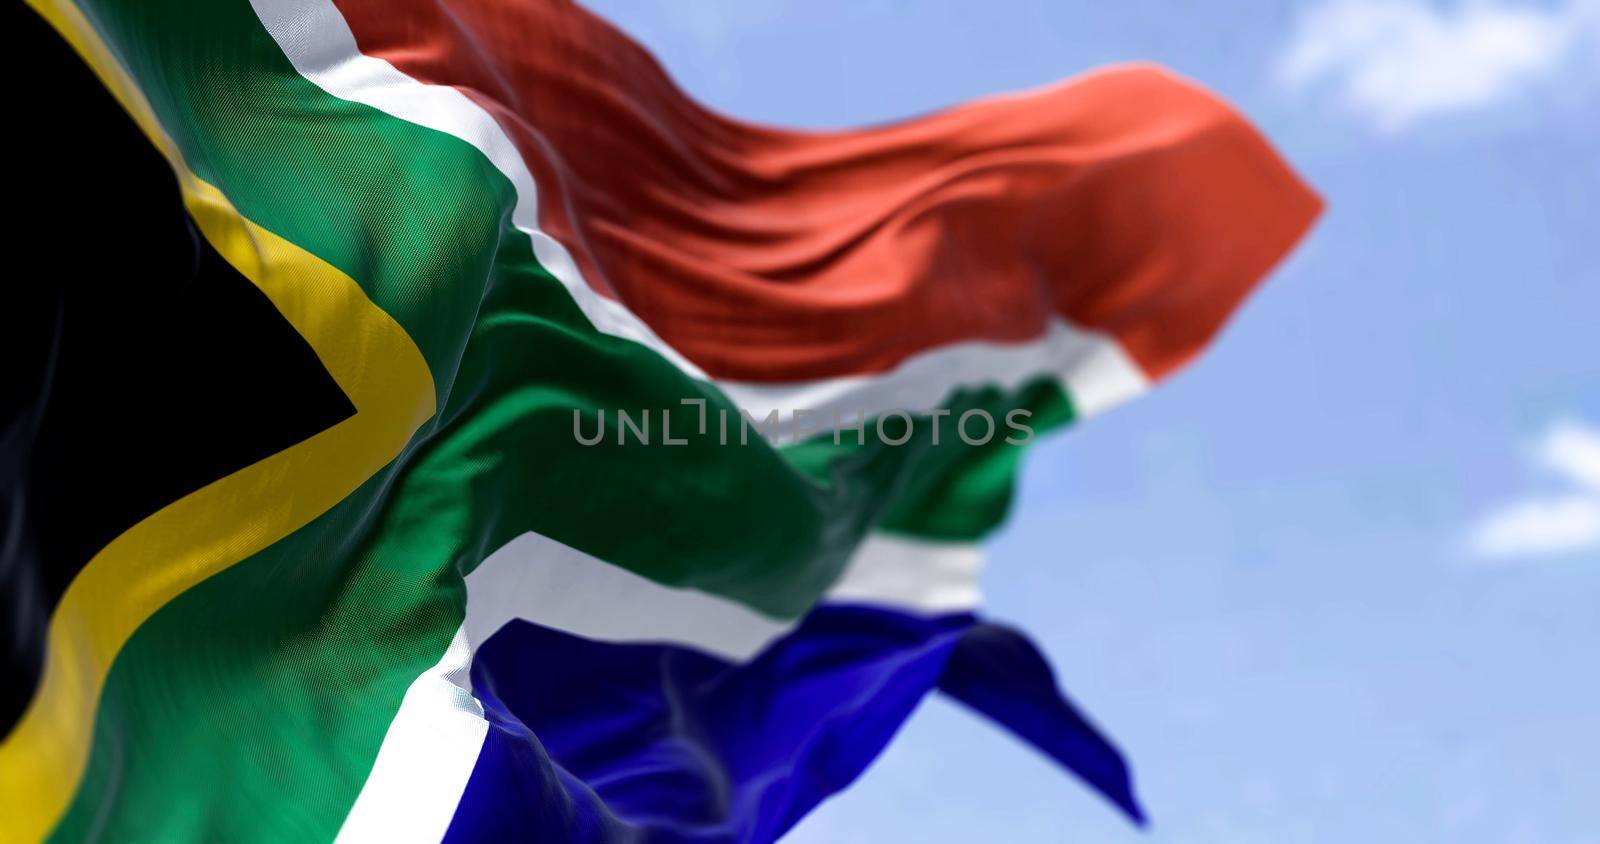 Detailed close up of the national flag of South Africa waving in the wind on a clear day. Democracy and politics. African country. Selective focus.